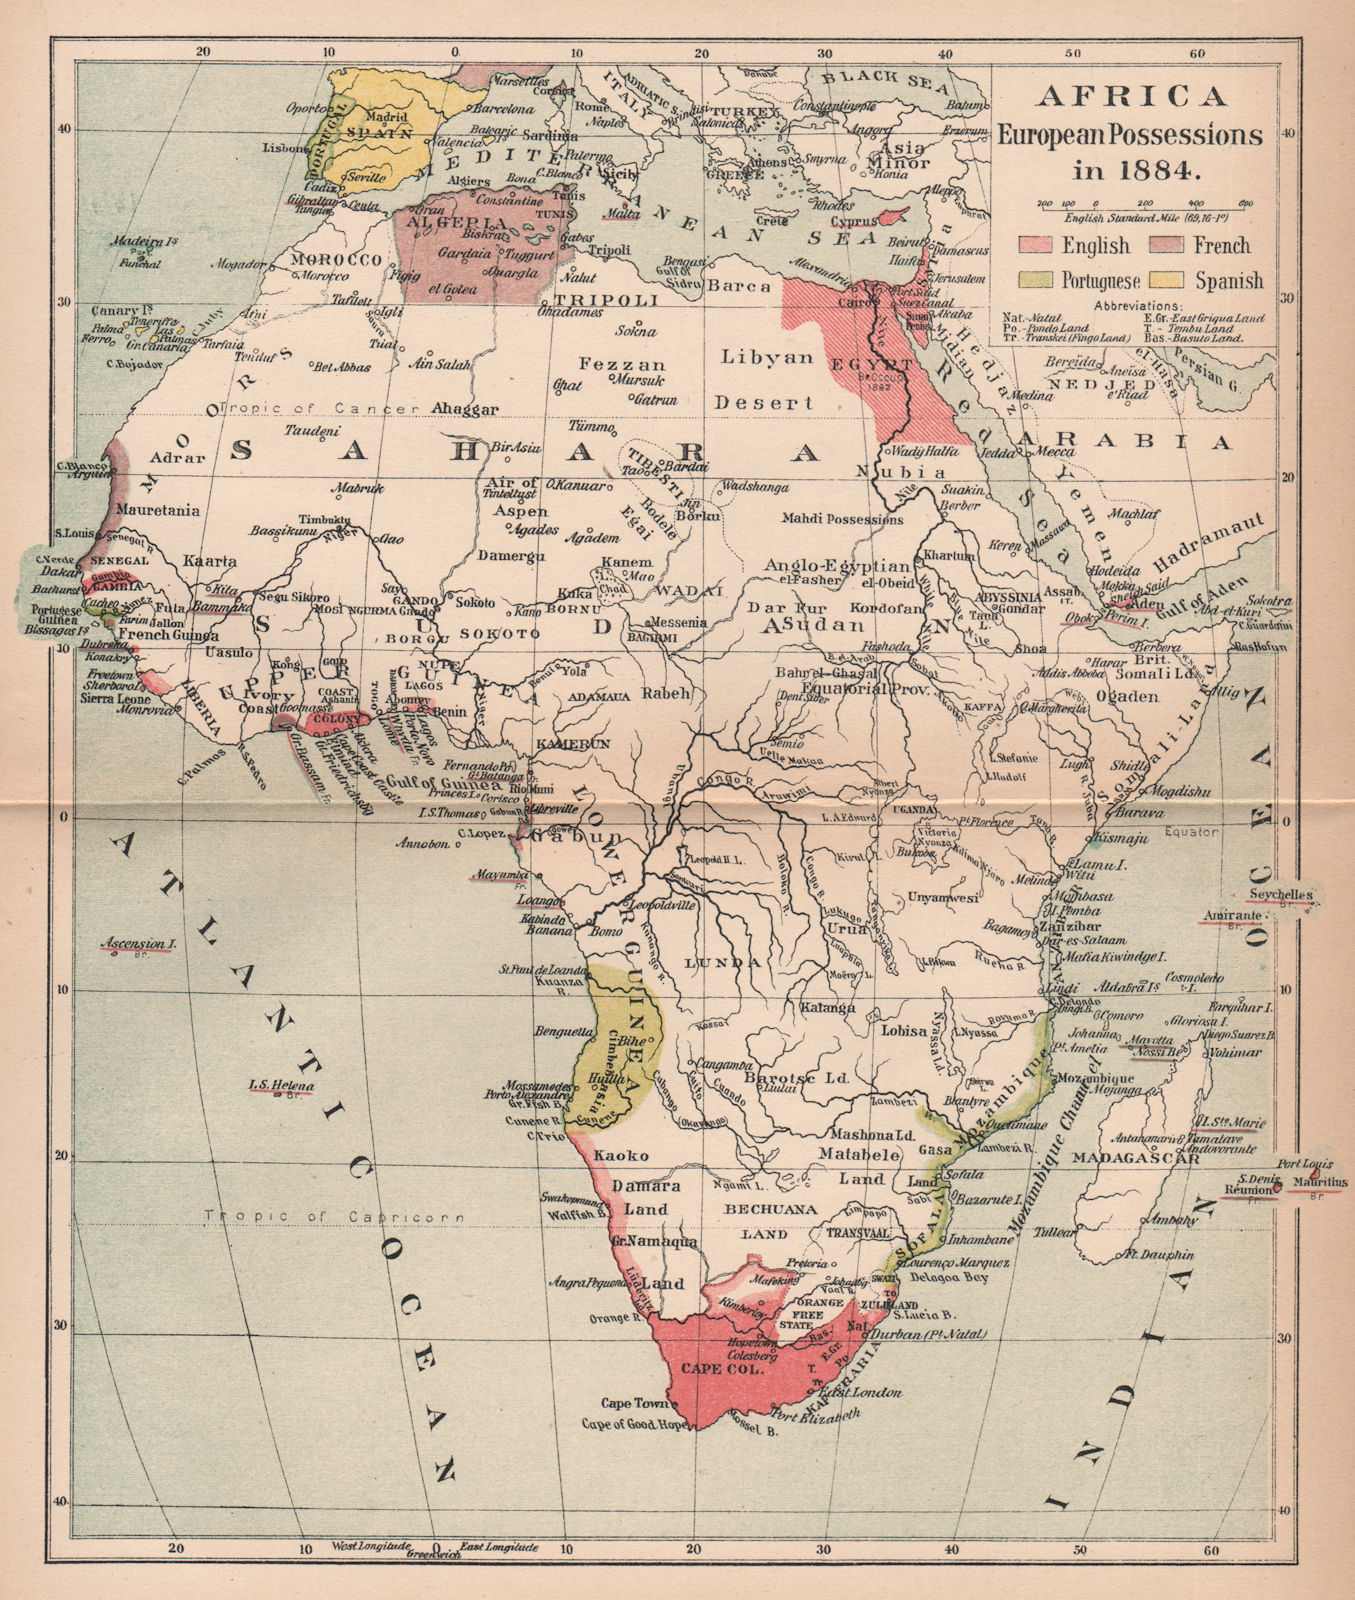 Associate Product AFRICA 1884. European possessions colonies. English French Portuguese 1910 map